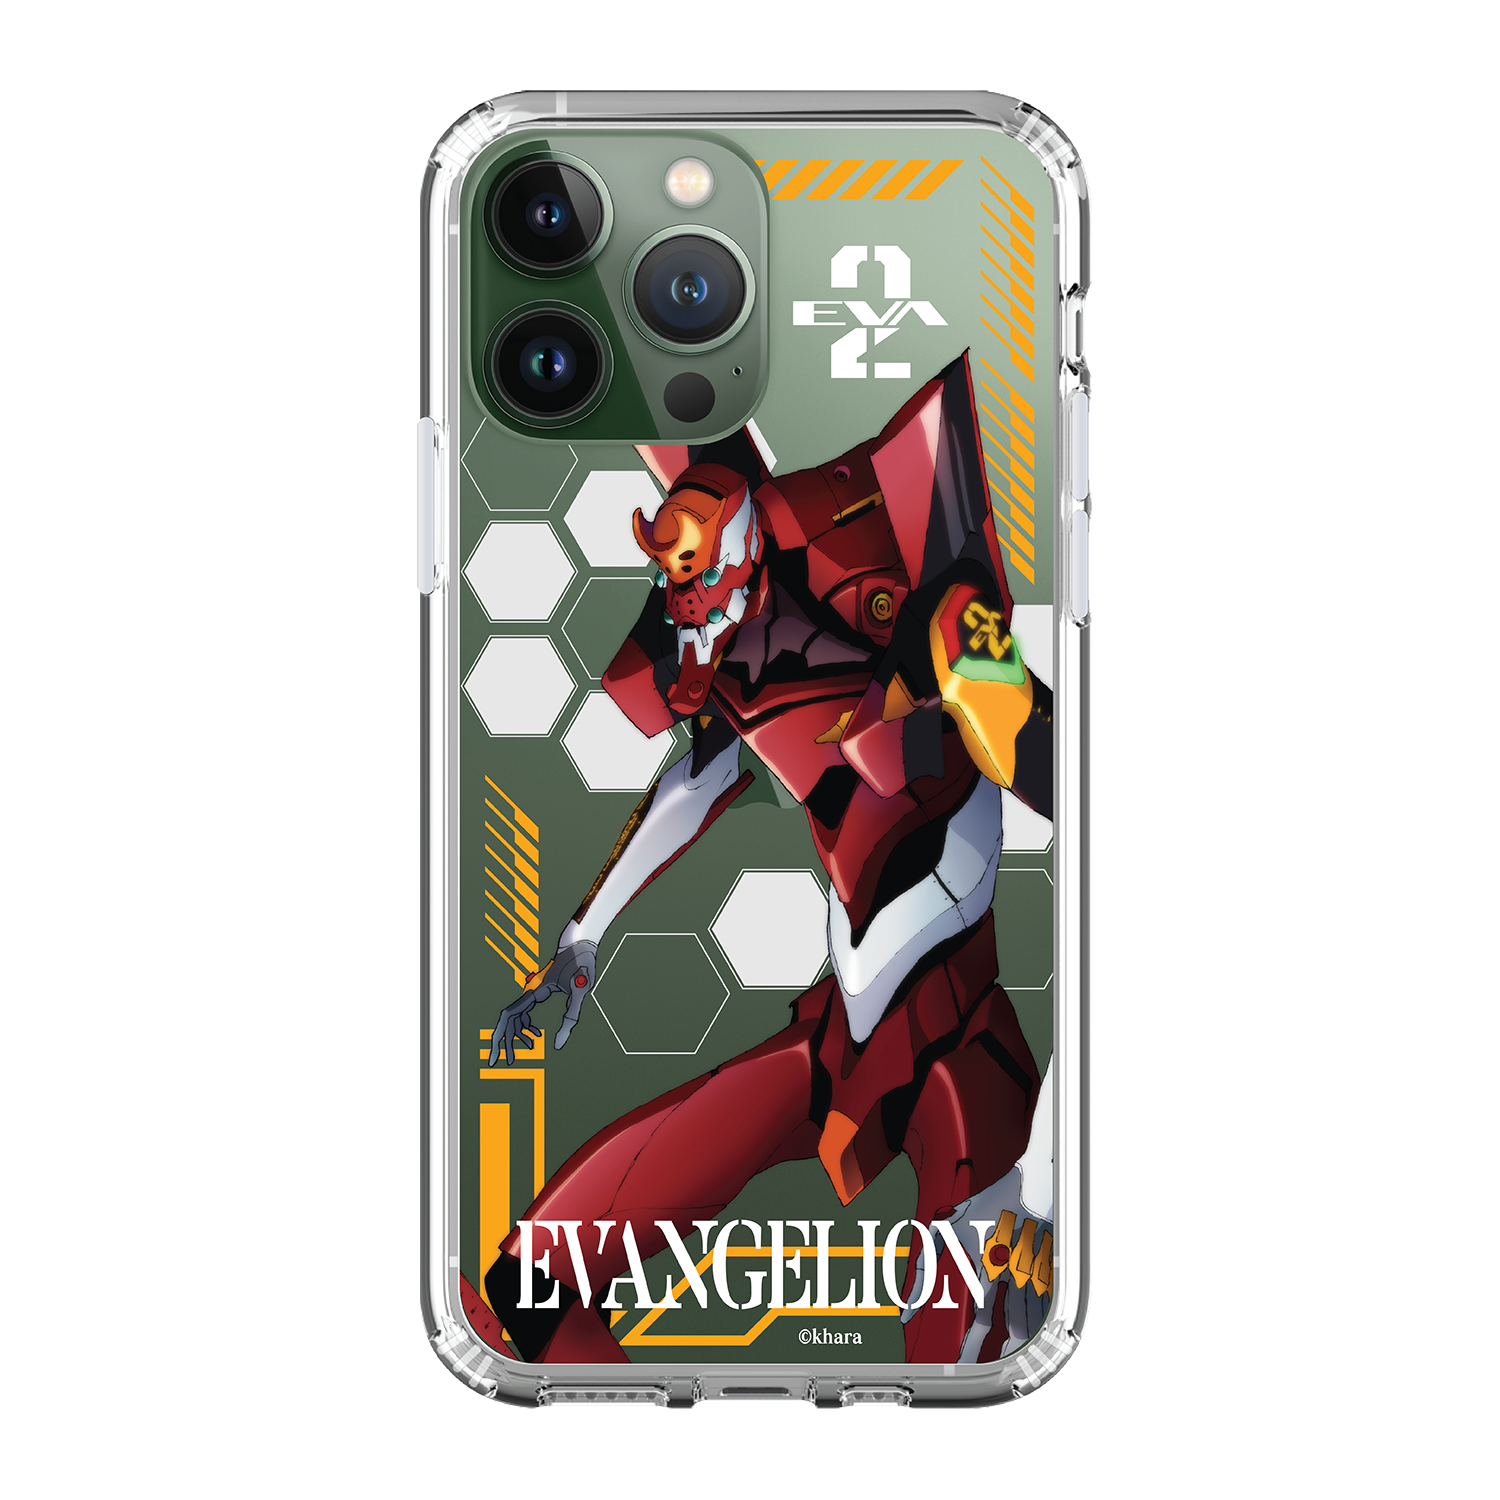 Evangelion Clear Case / iPhone Case / Android Case / Samsung Case  新世紀福音戰士 正版授權 全包邊氣囊防撞手機殼 (EVA-02)